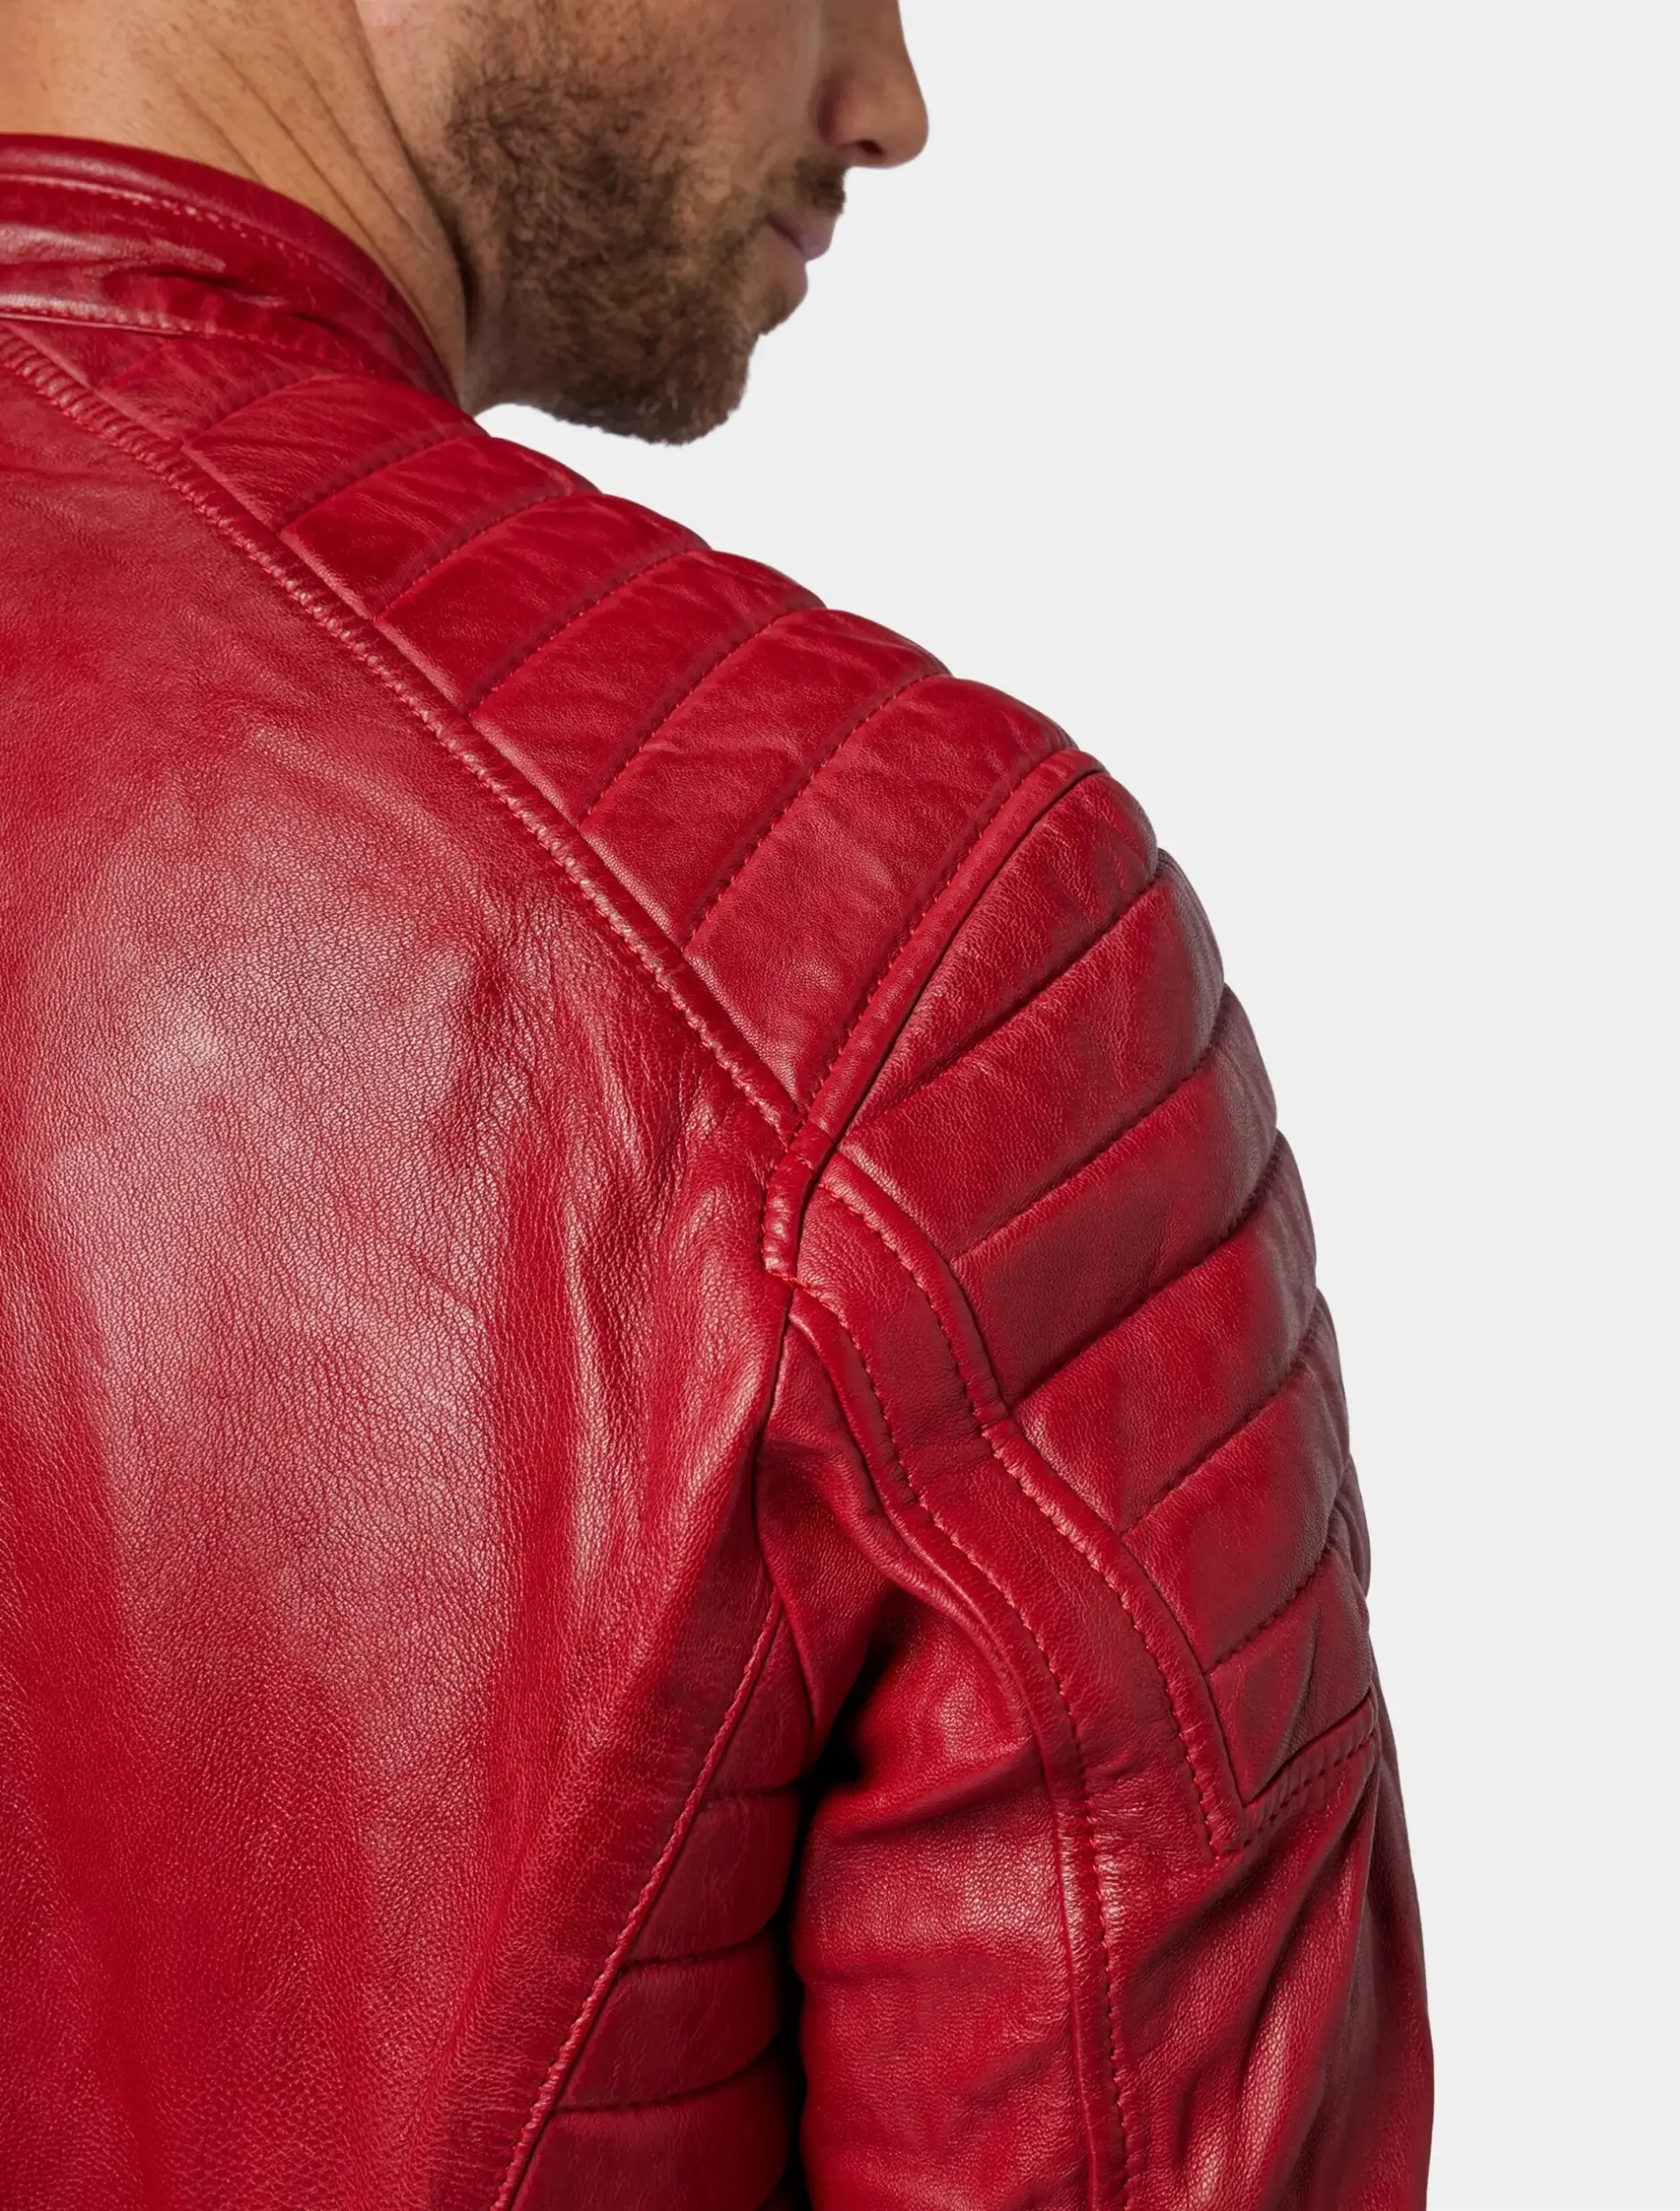 Men's Classic Red Leather Cafe Racer Jacket - Mens Leather Wear